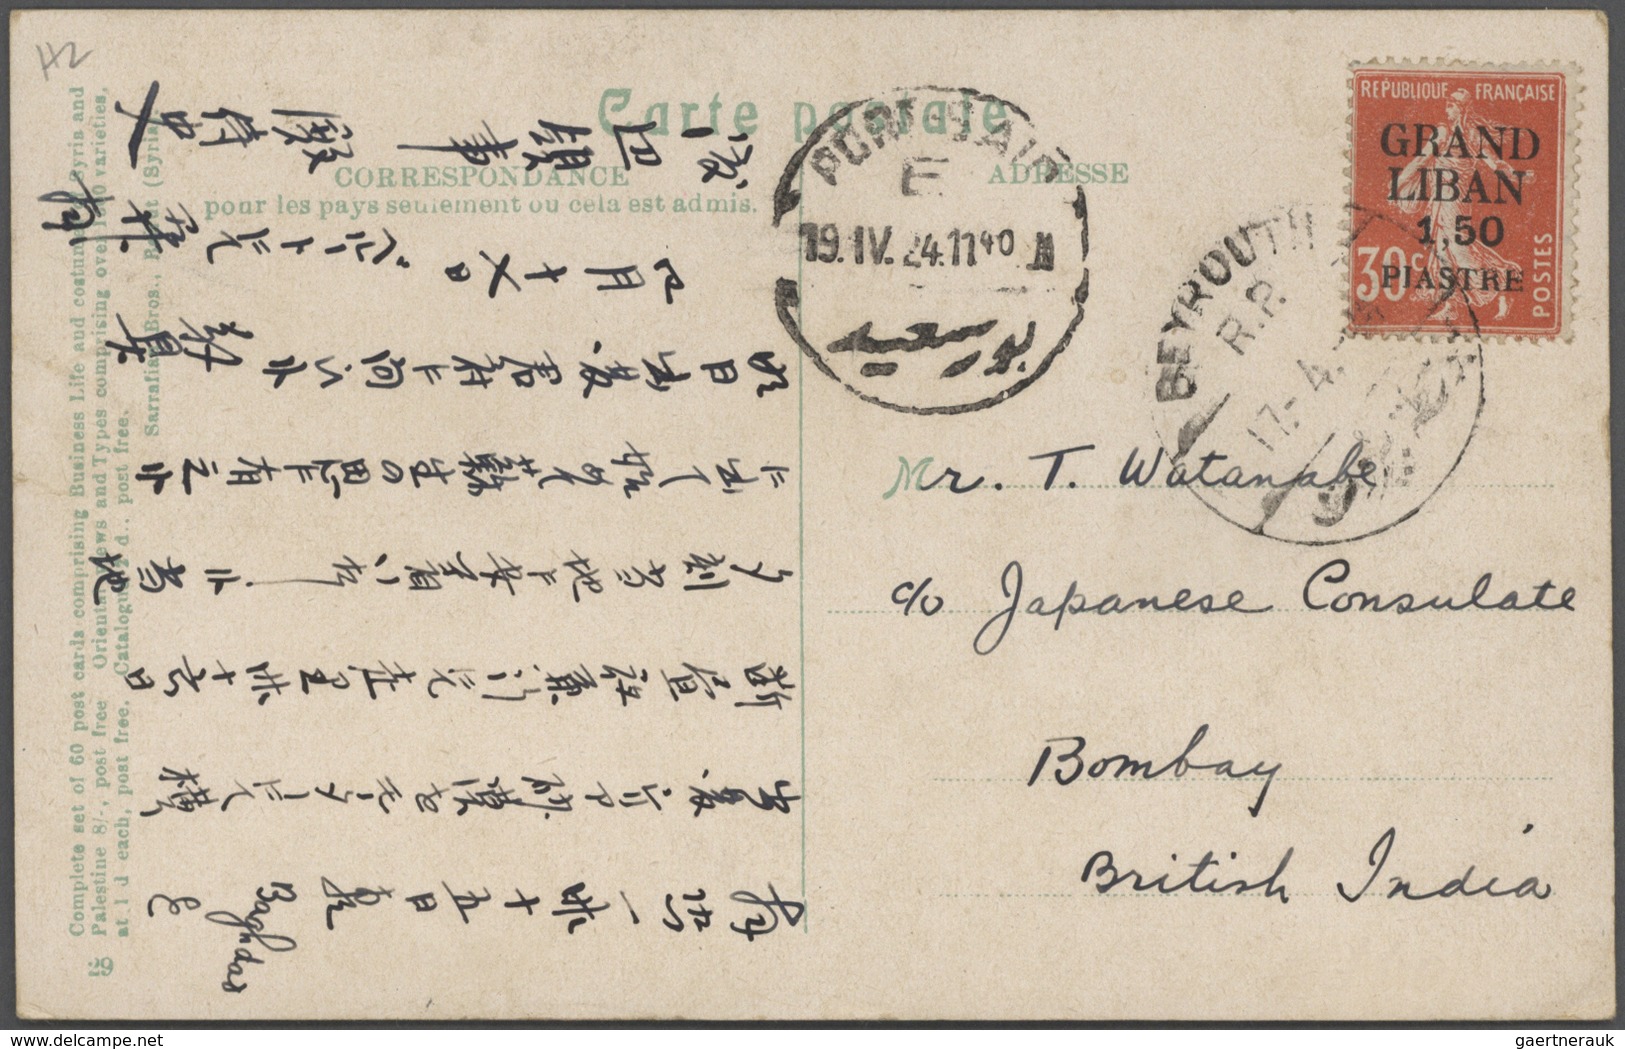 23441 Libanon: 1925-80, Box containing 330 covers and used stamps in 640 glassines, registered mail, air m